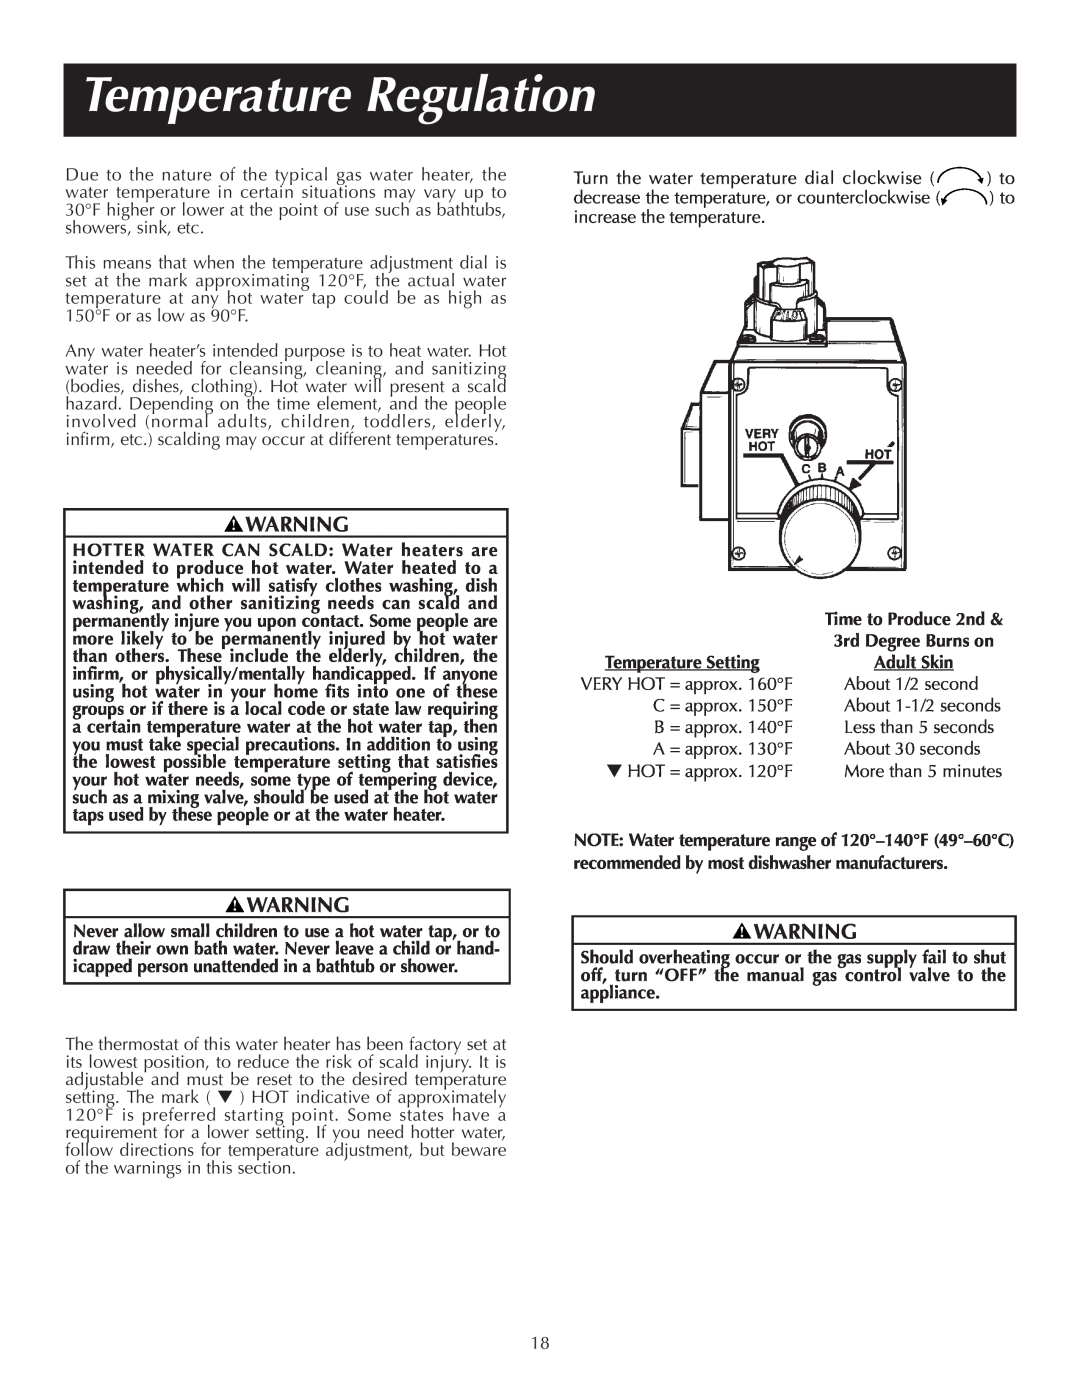 Reliance Water Heaters 184123-000 instruction manual Temperature Regulation, Temperature Setting 